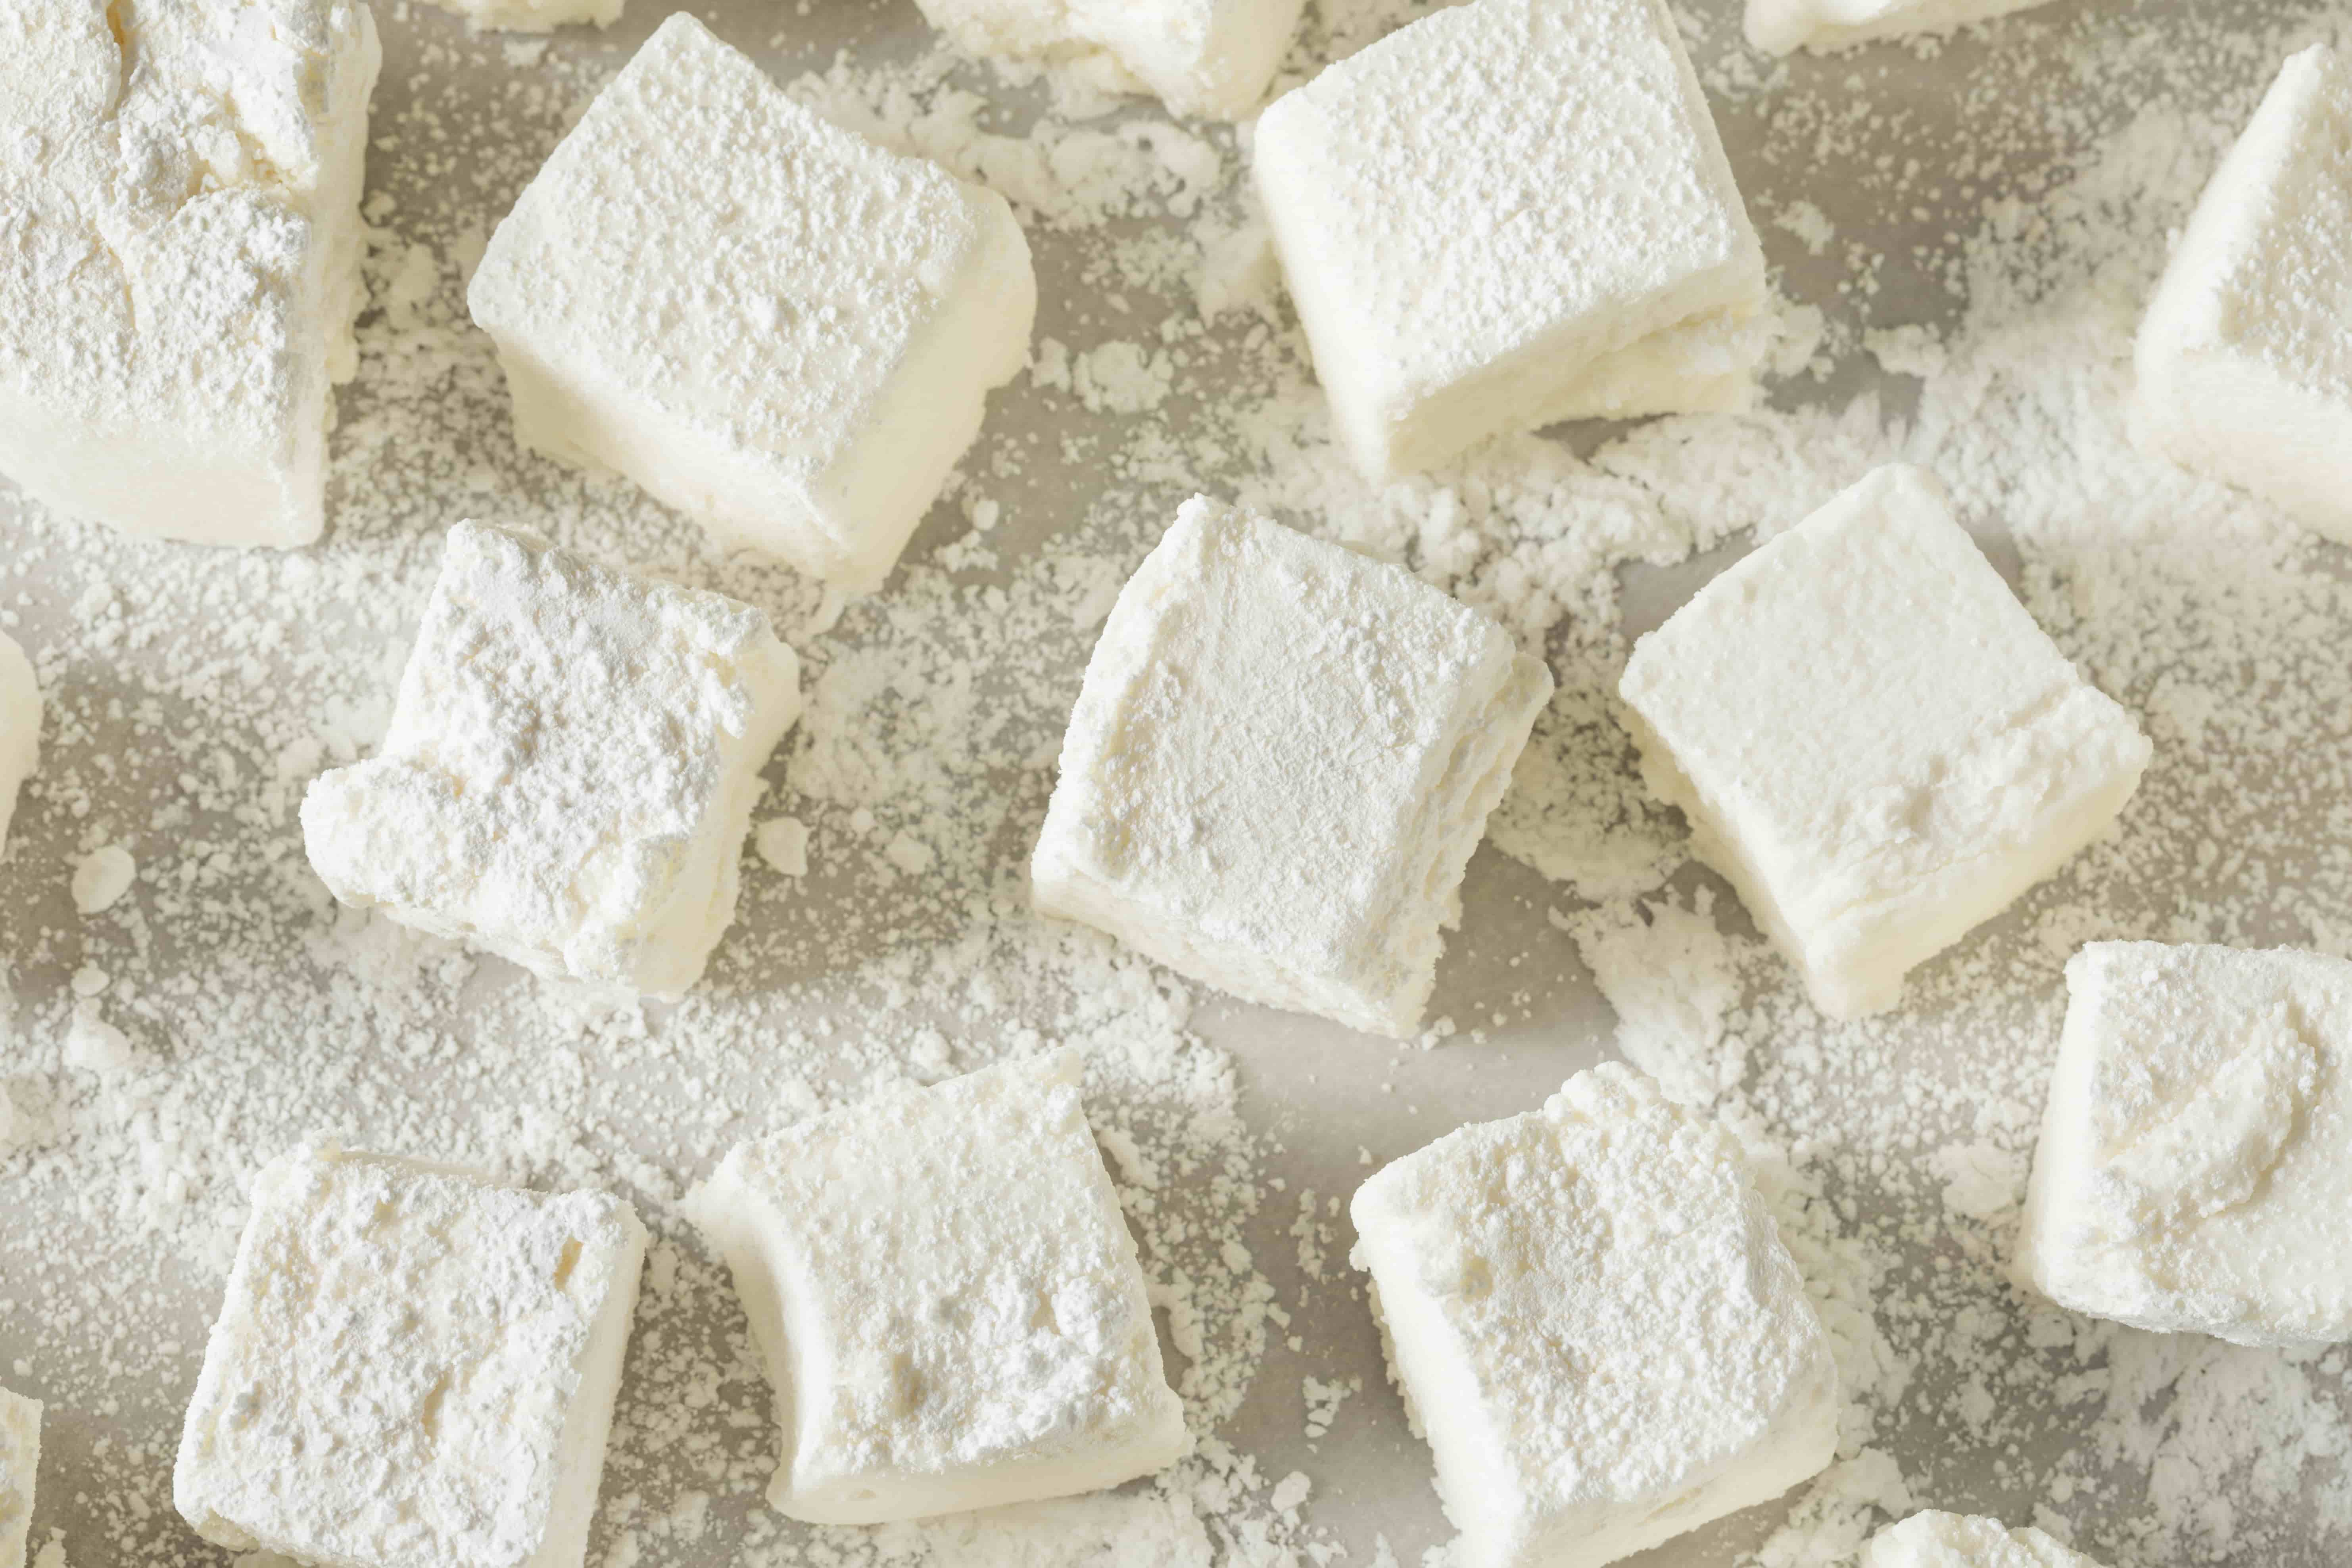 Flour dusted homemade square marshmallows.